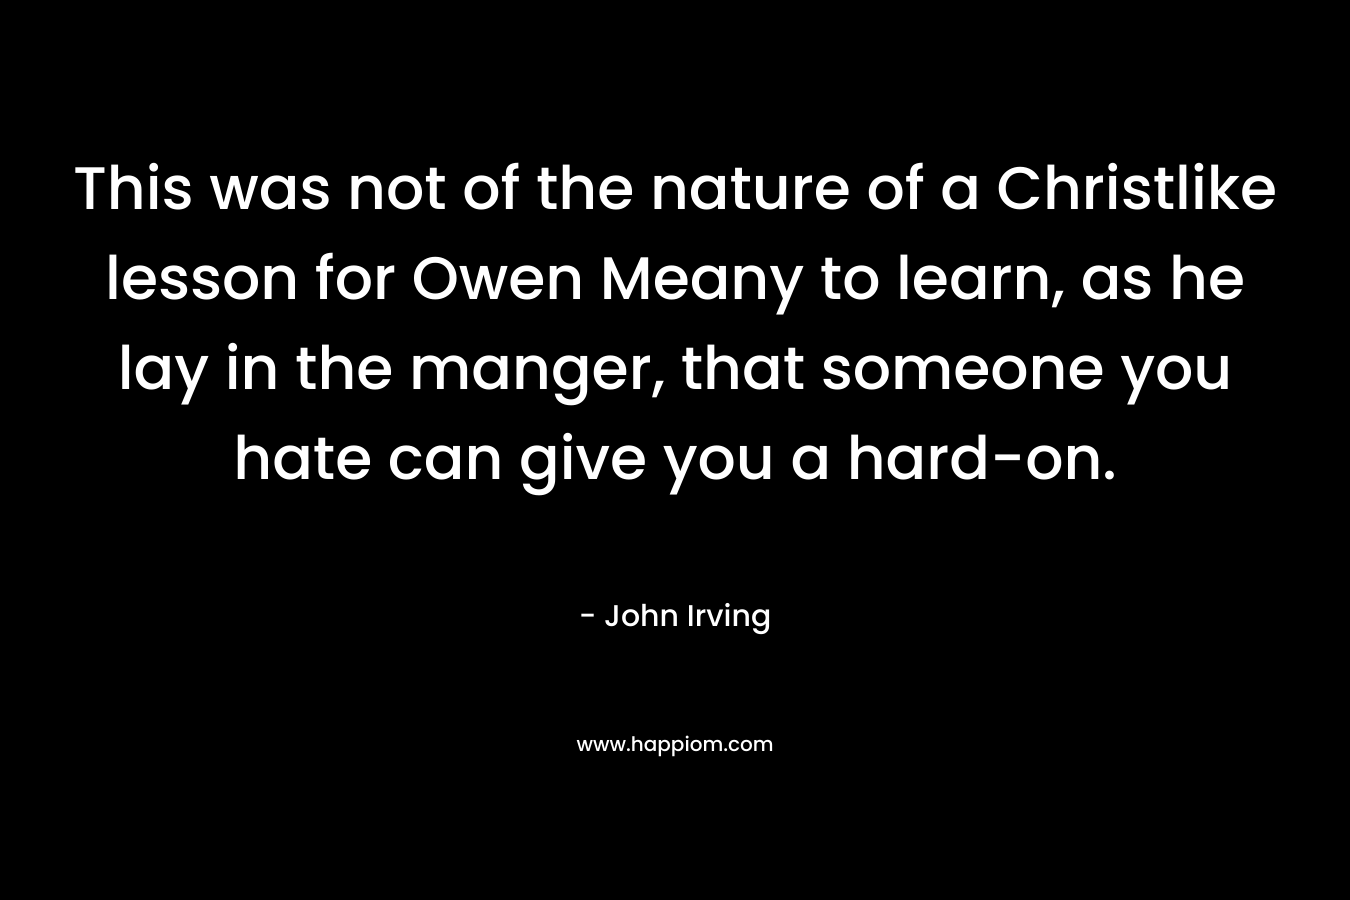 This was not of the nature of a Christlike lesson for Owen Meany to learn, as he lay in the manger, that someone you hate can give you a hard-on. – John Irving